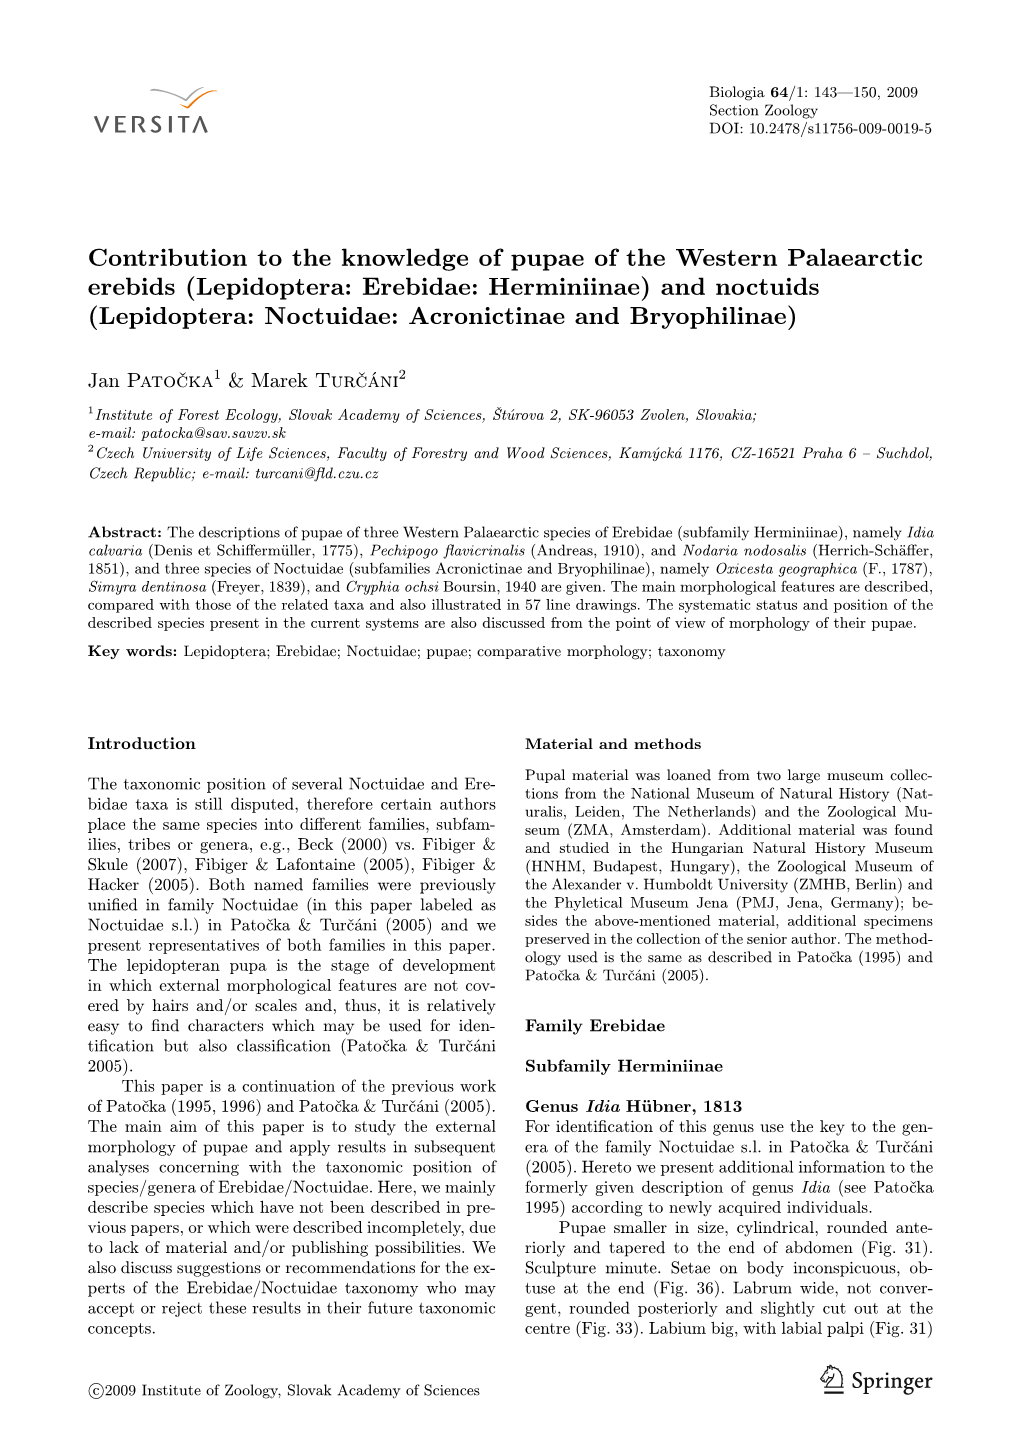 Contribution to the Knowledge of Pupae of the Western Palaearctic